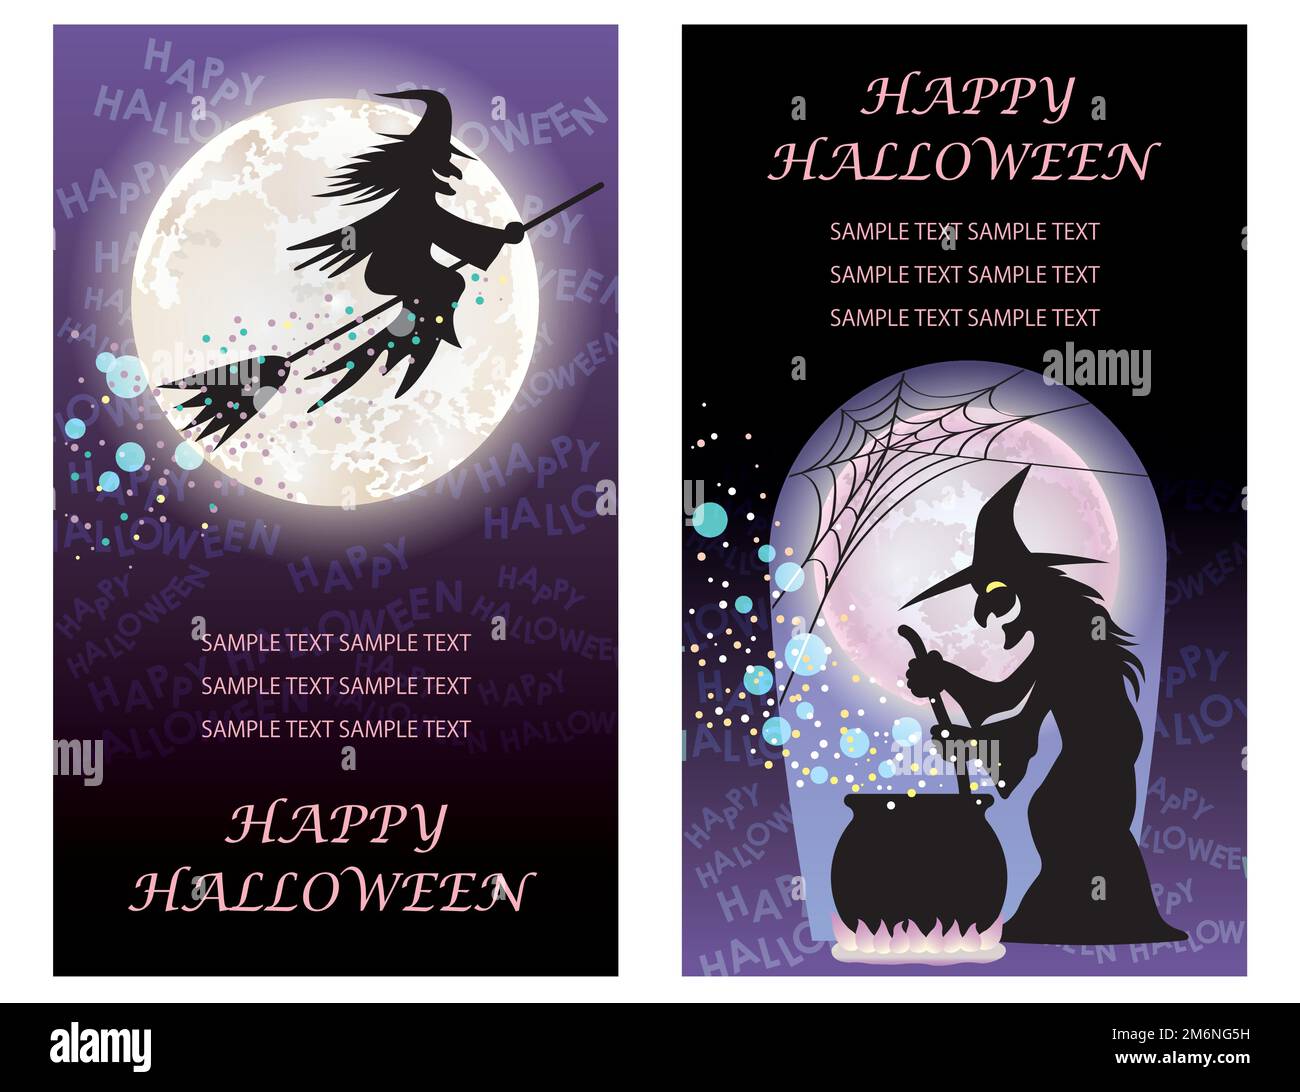 Set Of Happy Halloween Vector Greeting Card Templates With Witches. Stock Vector